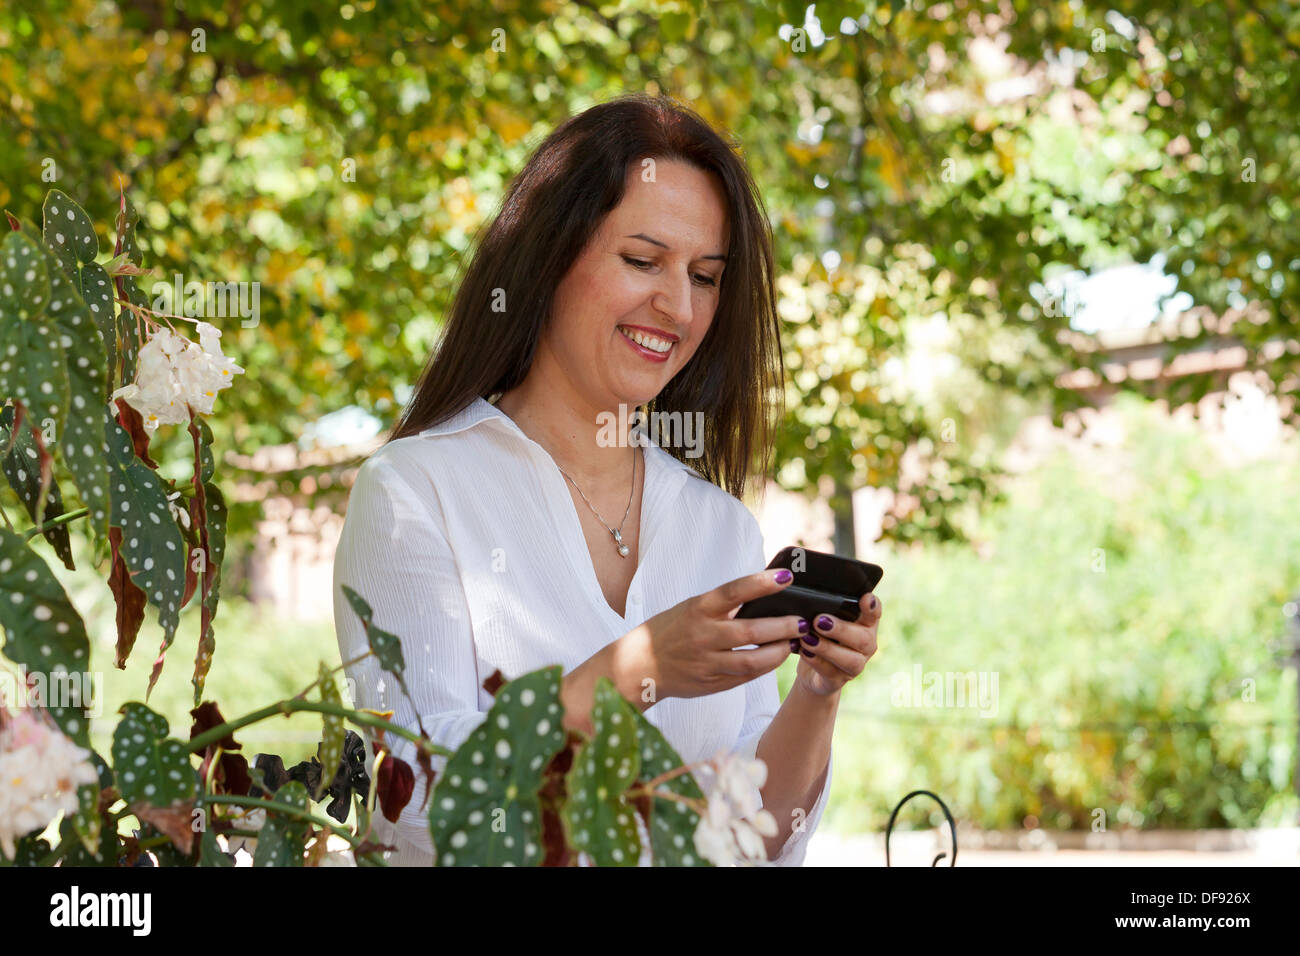 Middle aged Caucasian woman using smart phone in garden Stock Photo